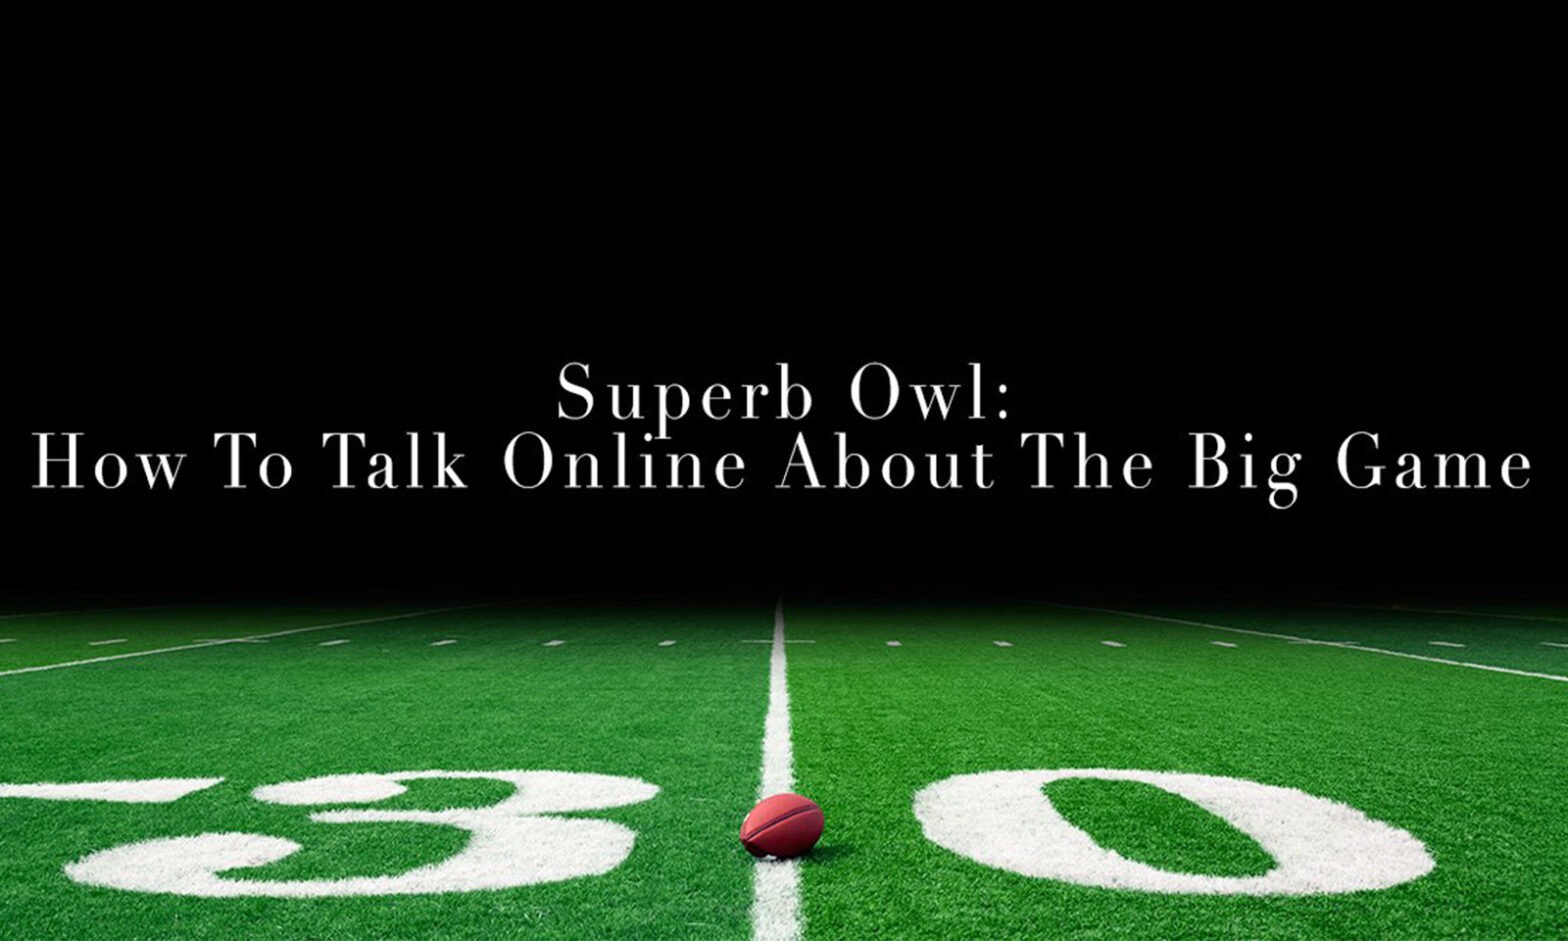 Superb Owl: How To Talk Online About The Big Game